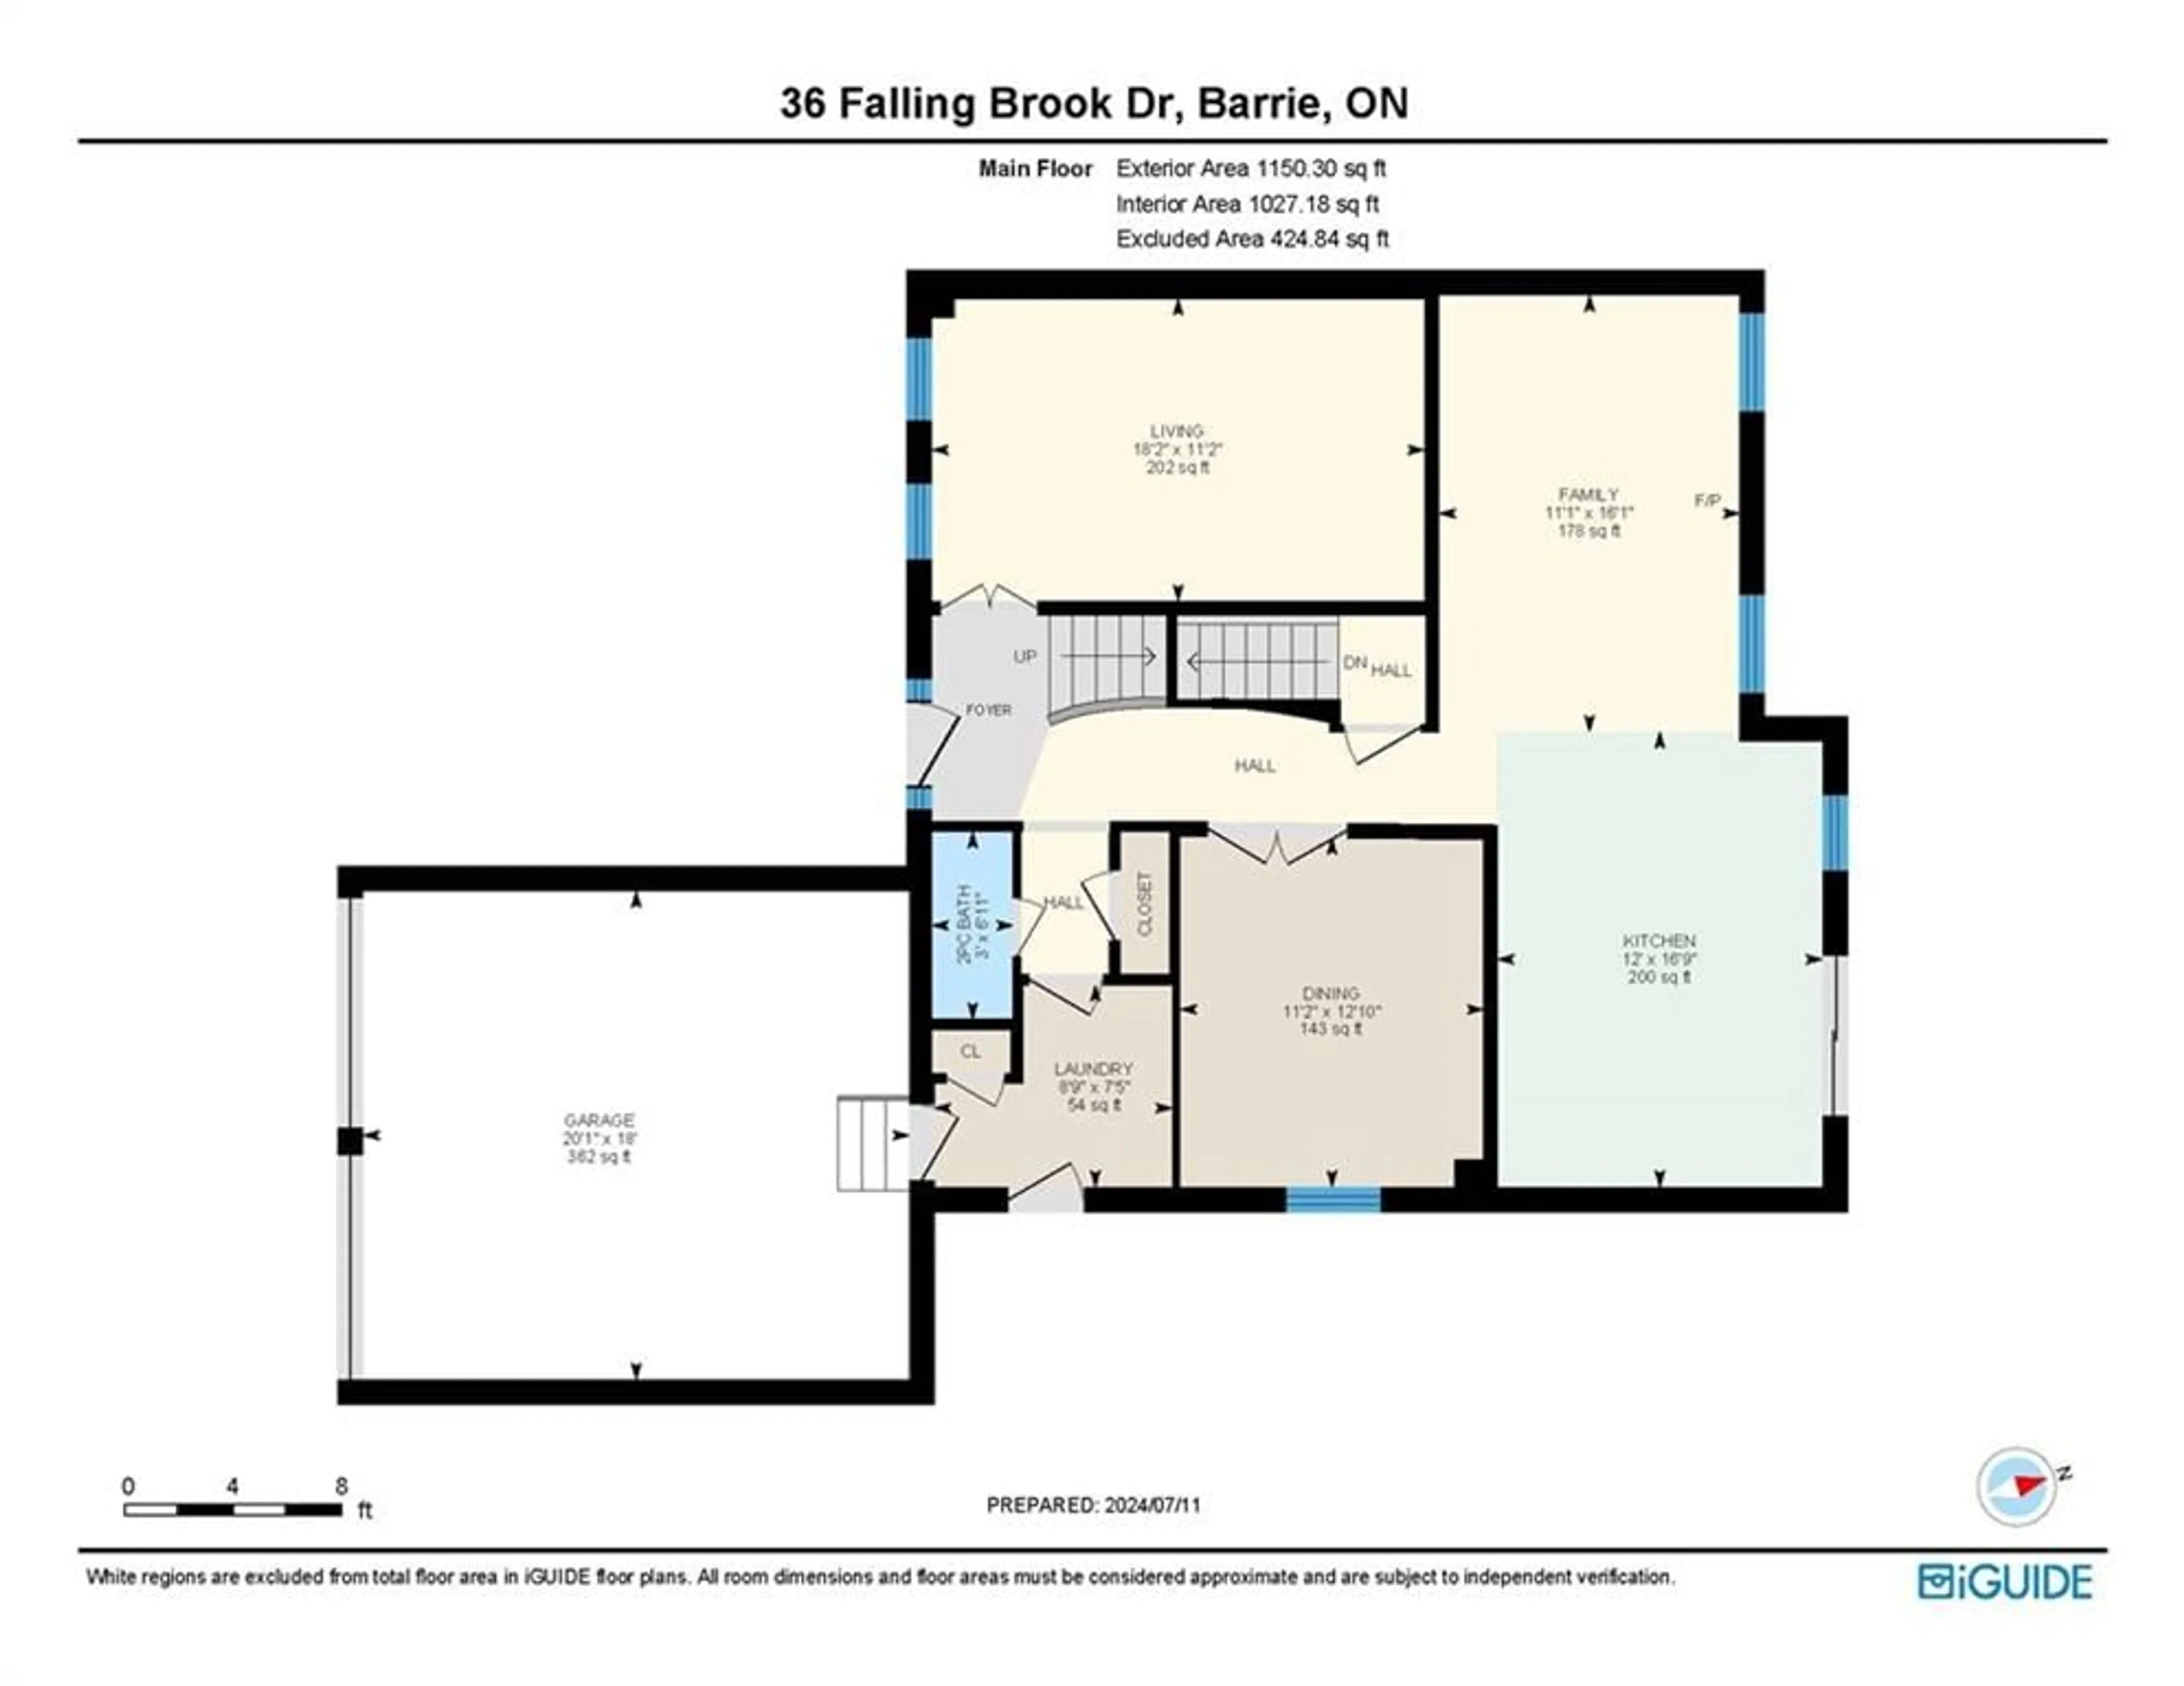 Floor plan for 36 Falling Brook Dr, Barrie Ontario L4N 7E9